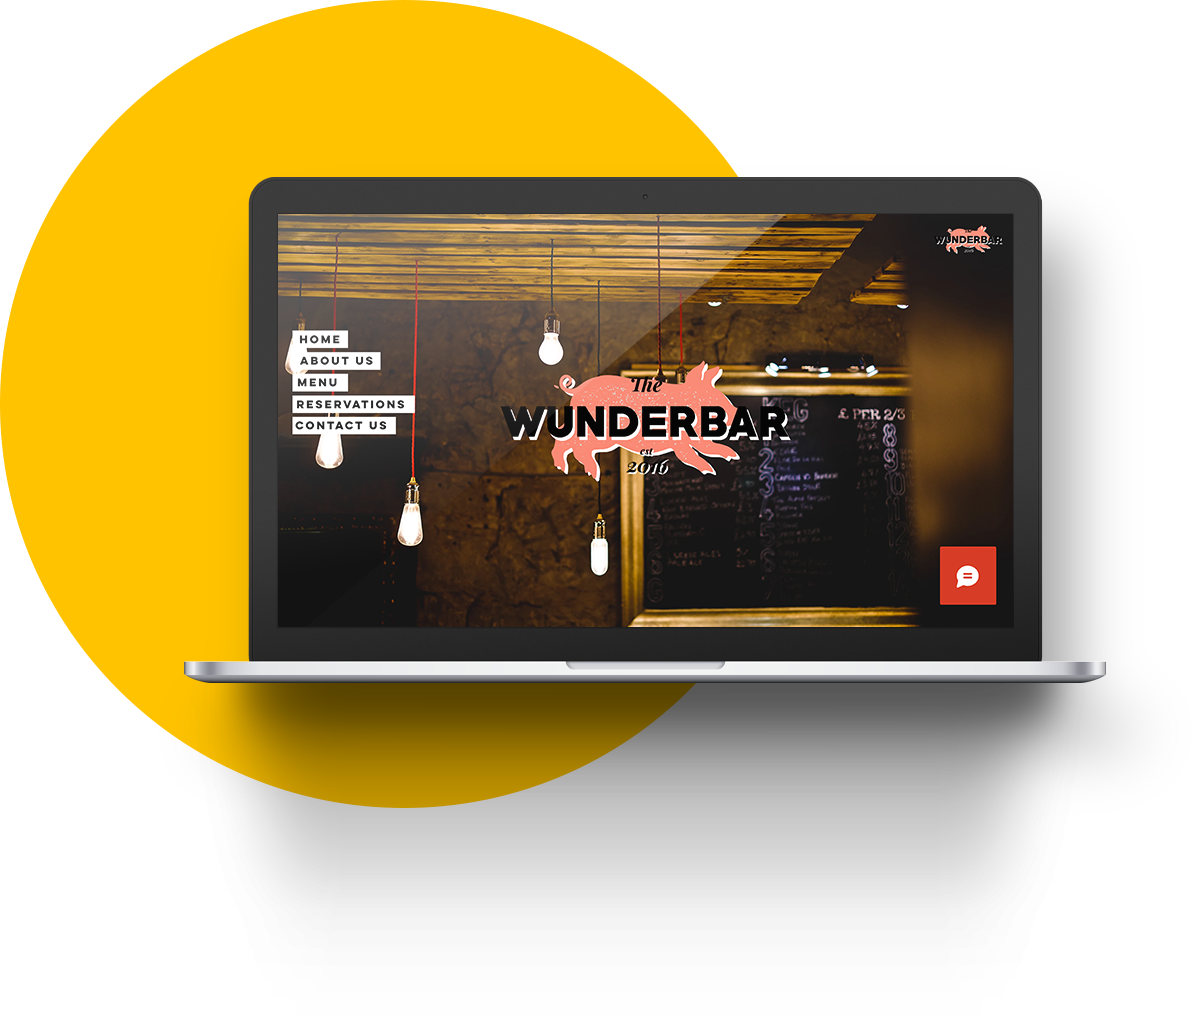 A laptop displaying the front page of the website of one of our clients - 'Wunderbar'.